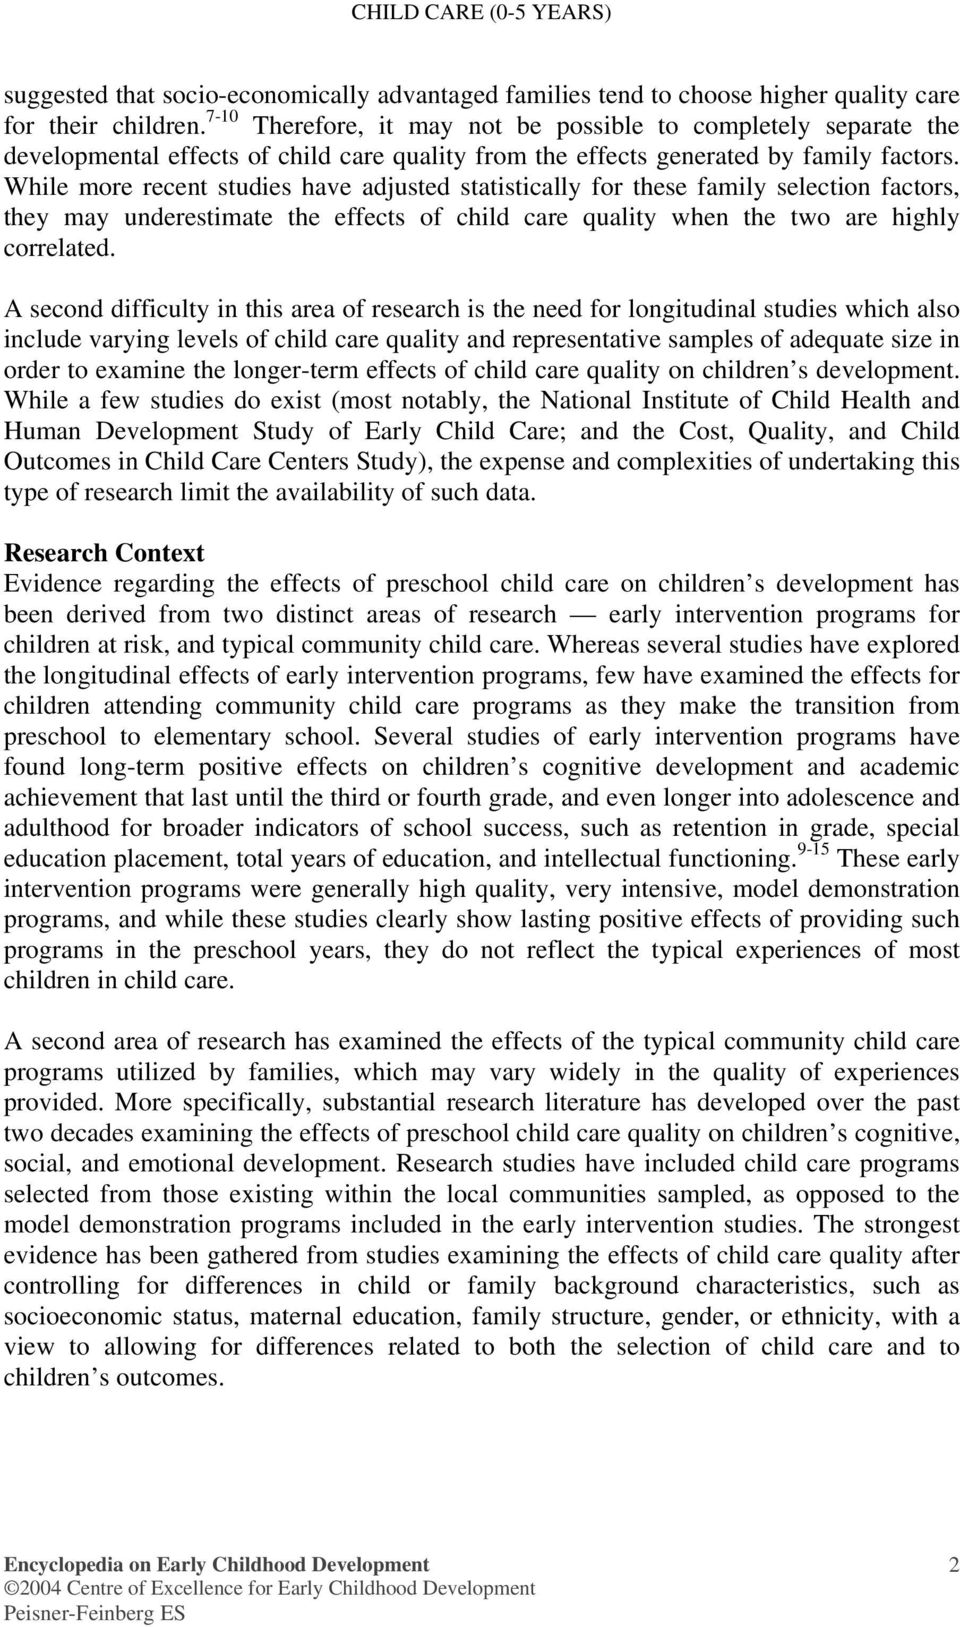 While more recent studies have adjusted statistically for these family selection factors, they may underestimate the effects of child care quality when the two are highly correlated.